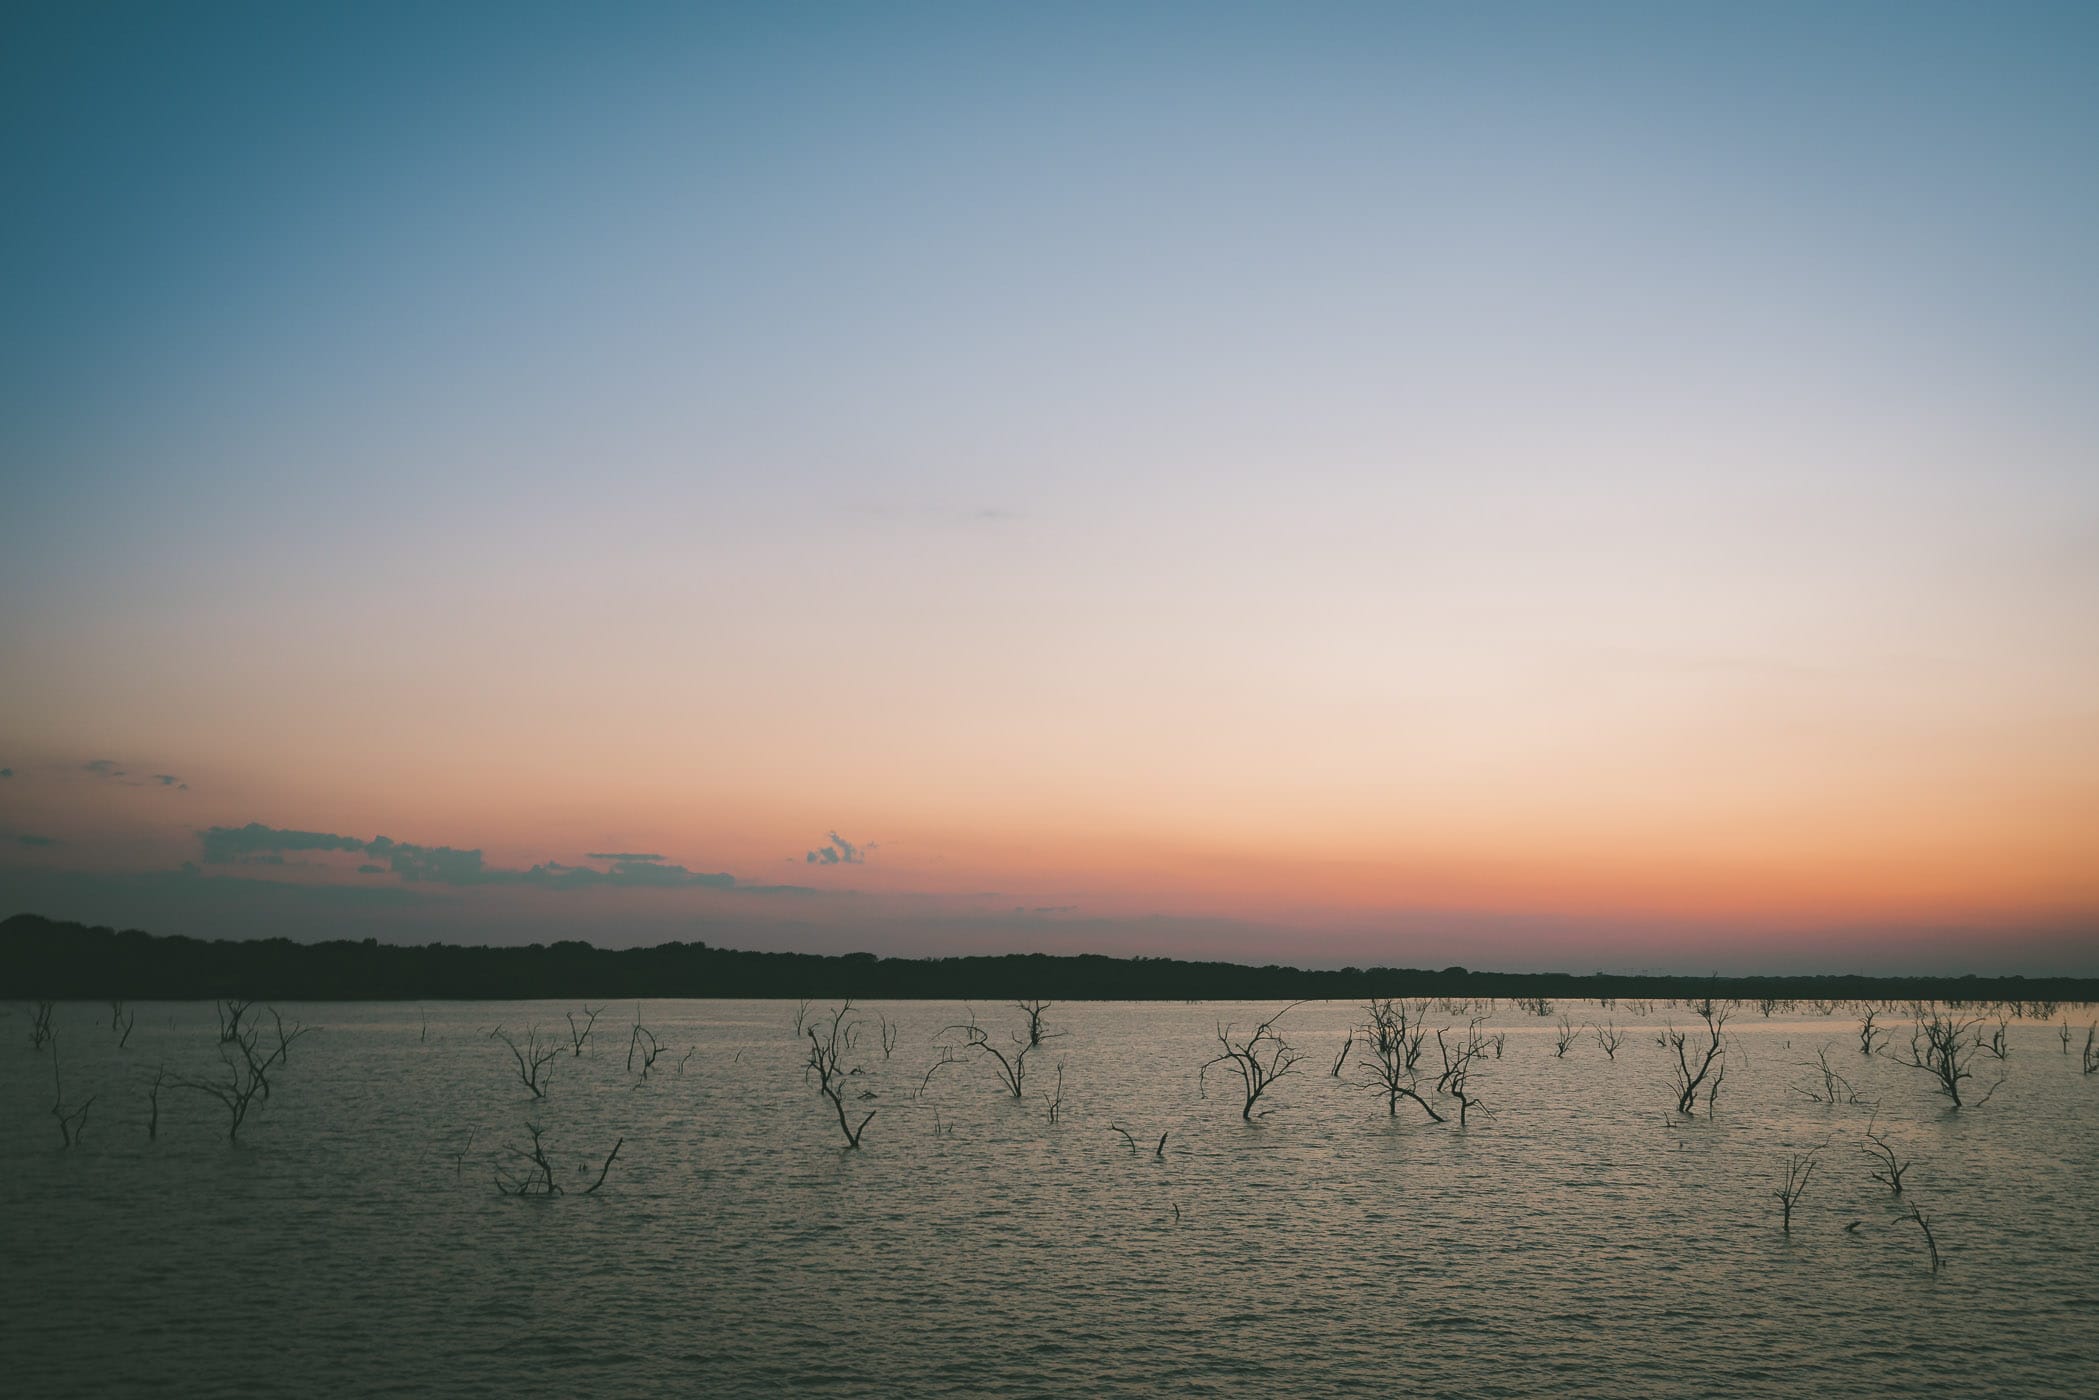 Trees—remnants from the 1953 impoundment of North Texas' Lake Lavon—poke from the water into the evening sky near the town of Princeton.